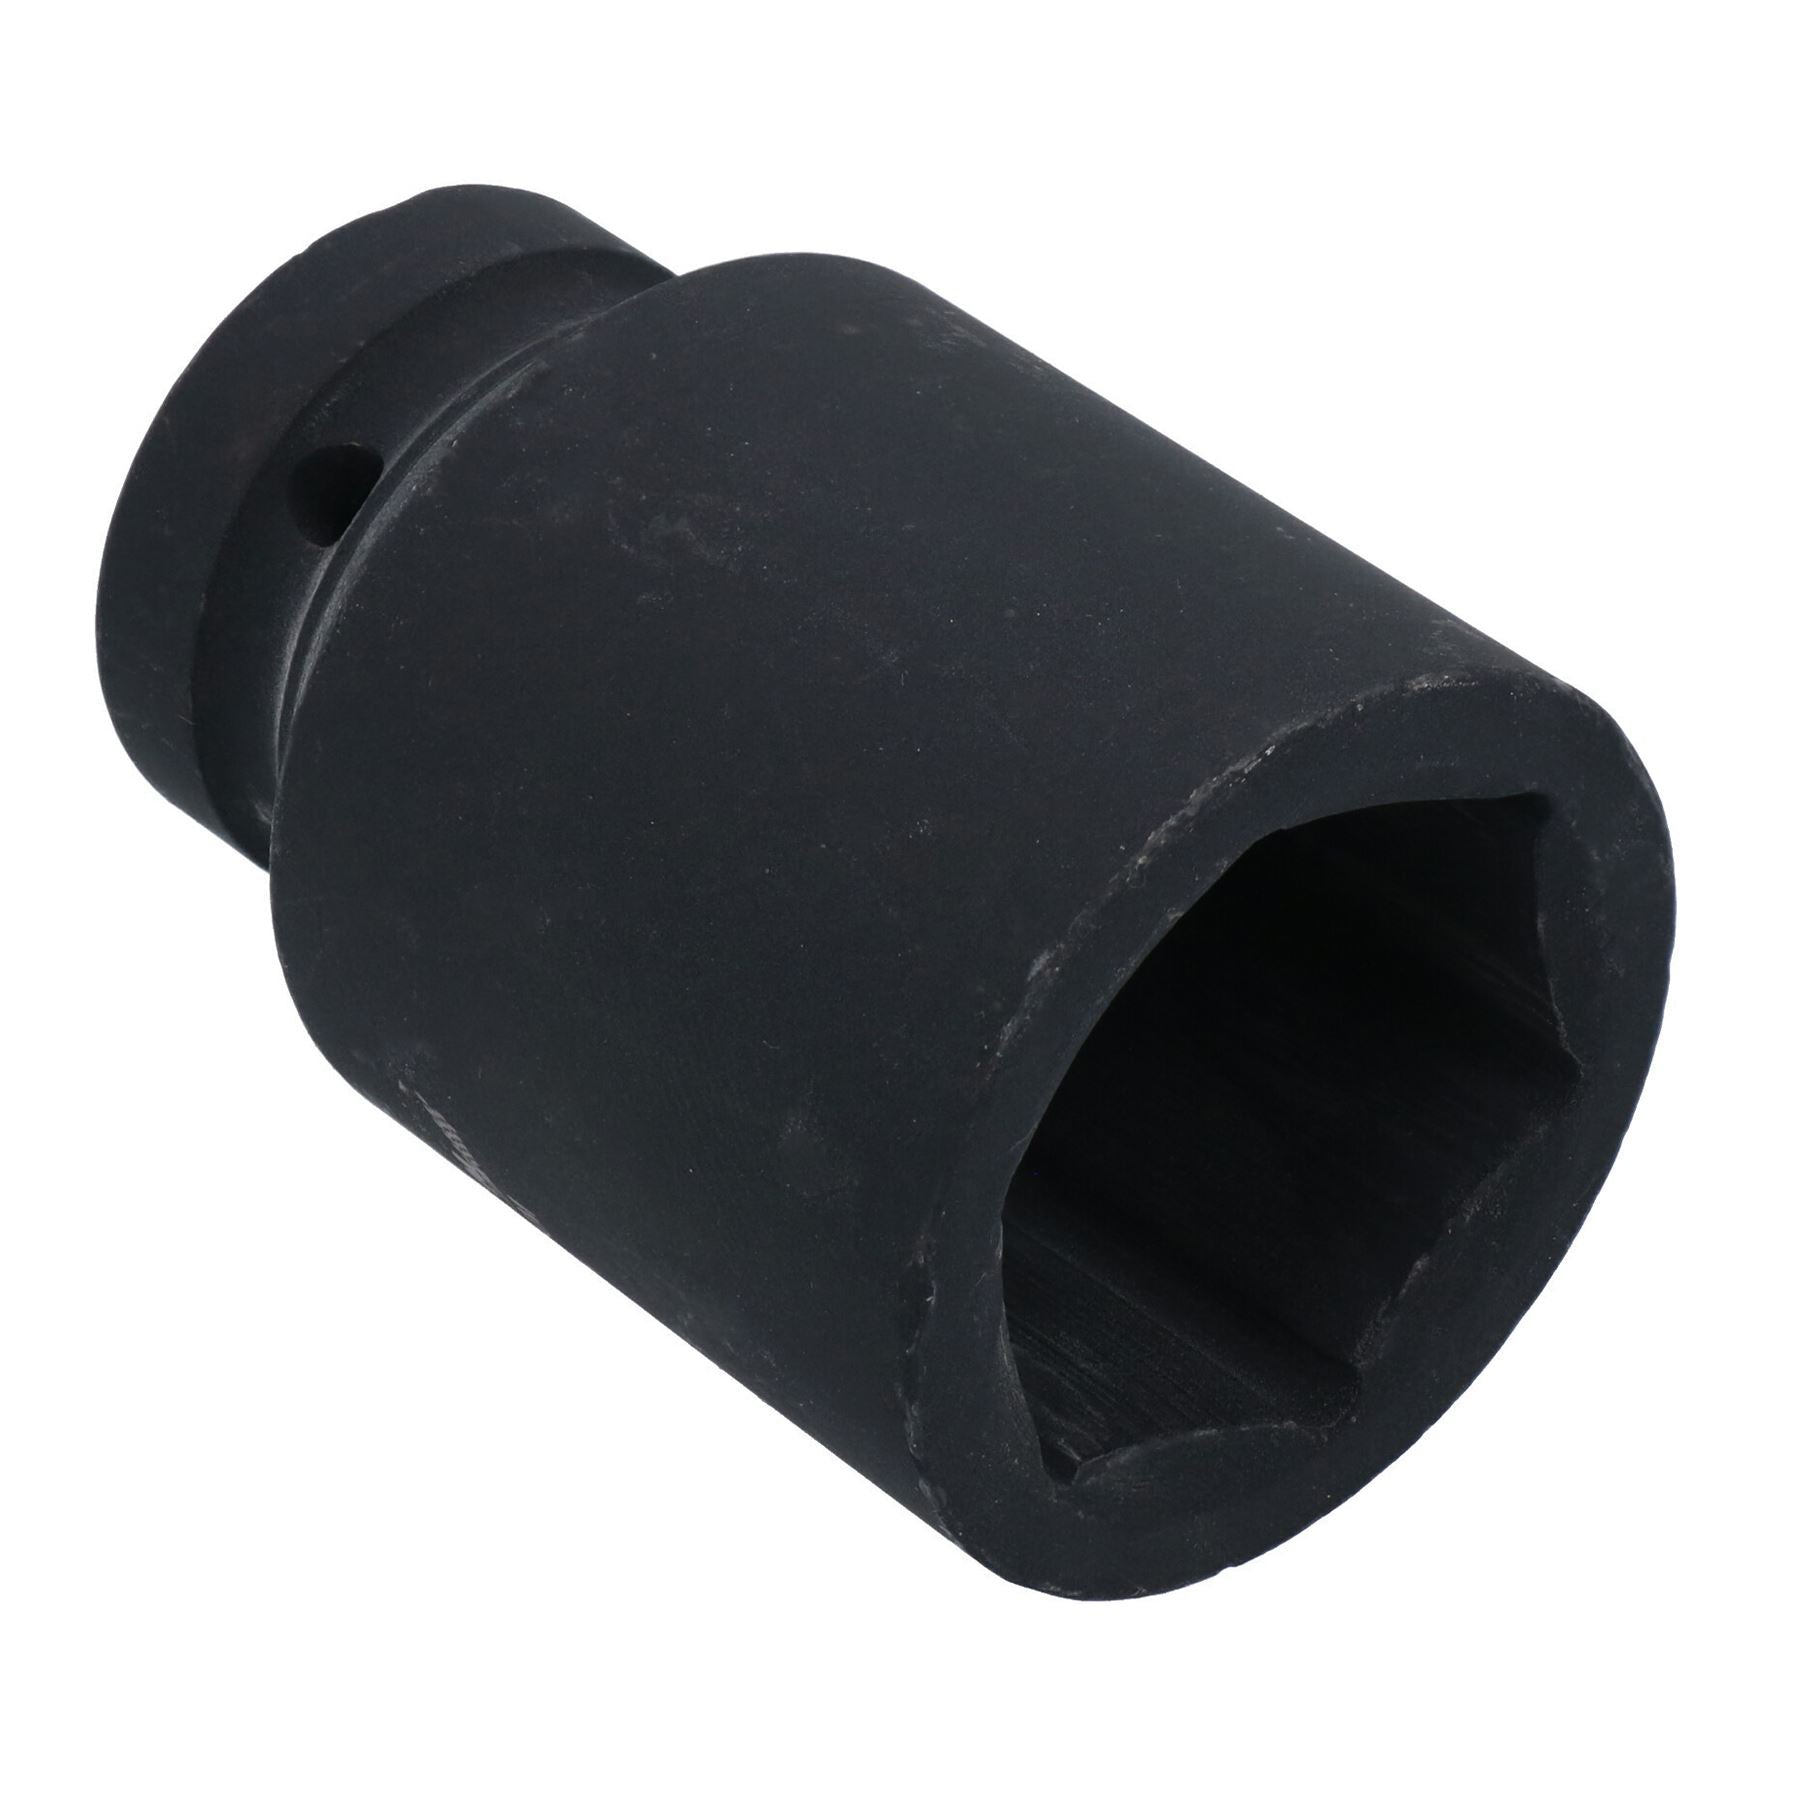 3/4” Drive 38mm Double Deep Impact Impacted Socket 6 Sided Single Hex HGV